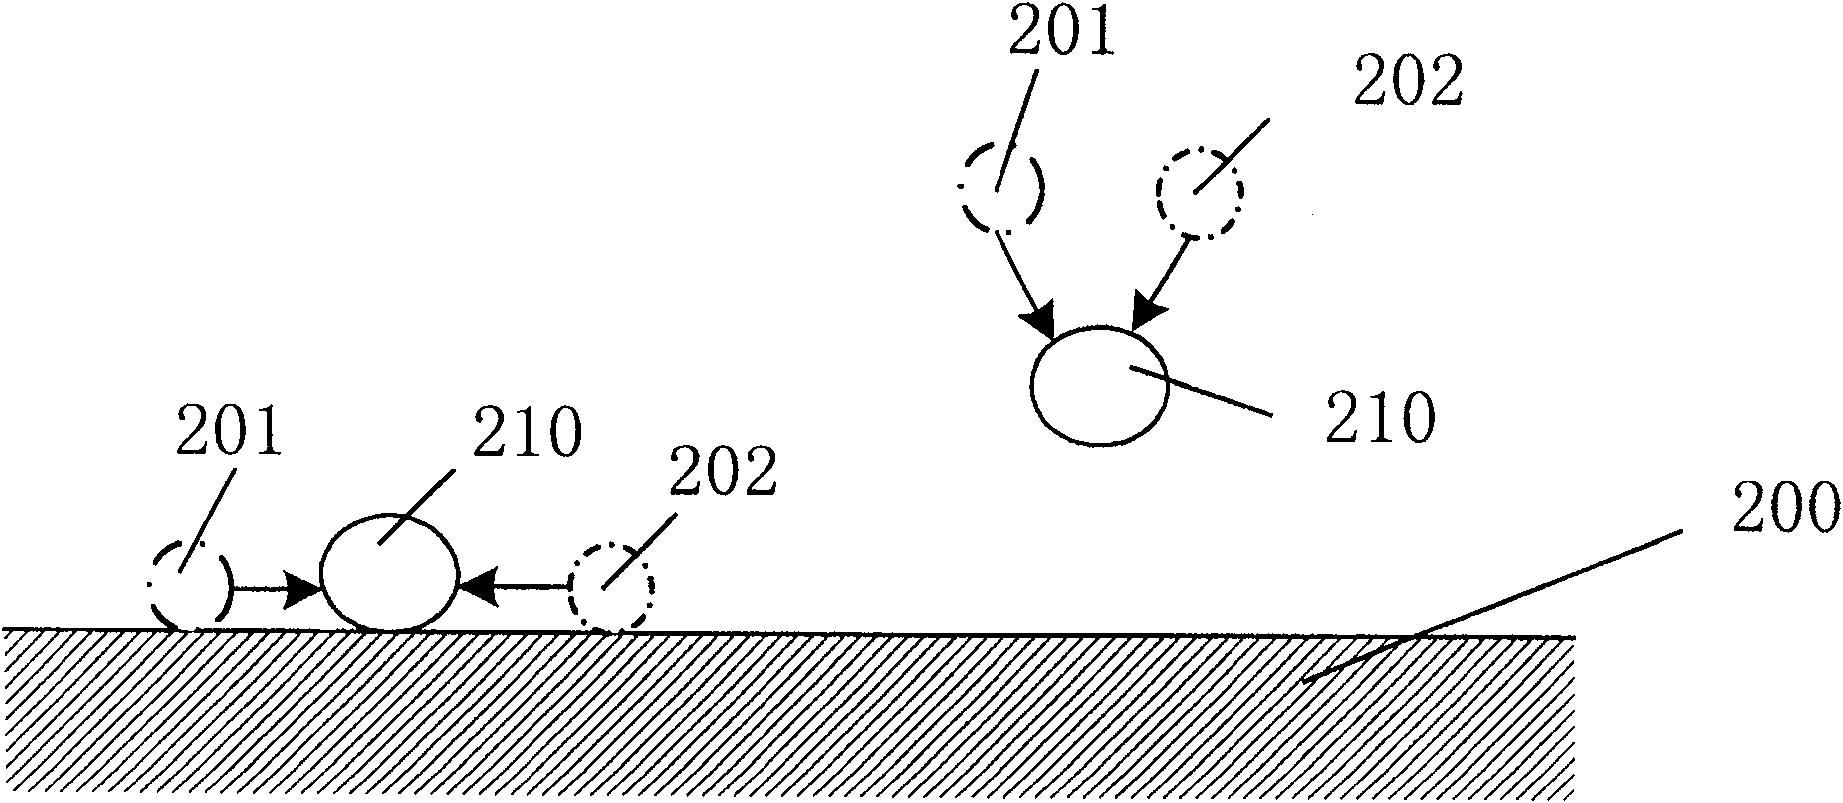 Method for forming grid side wall layer